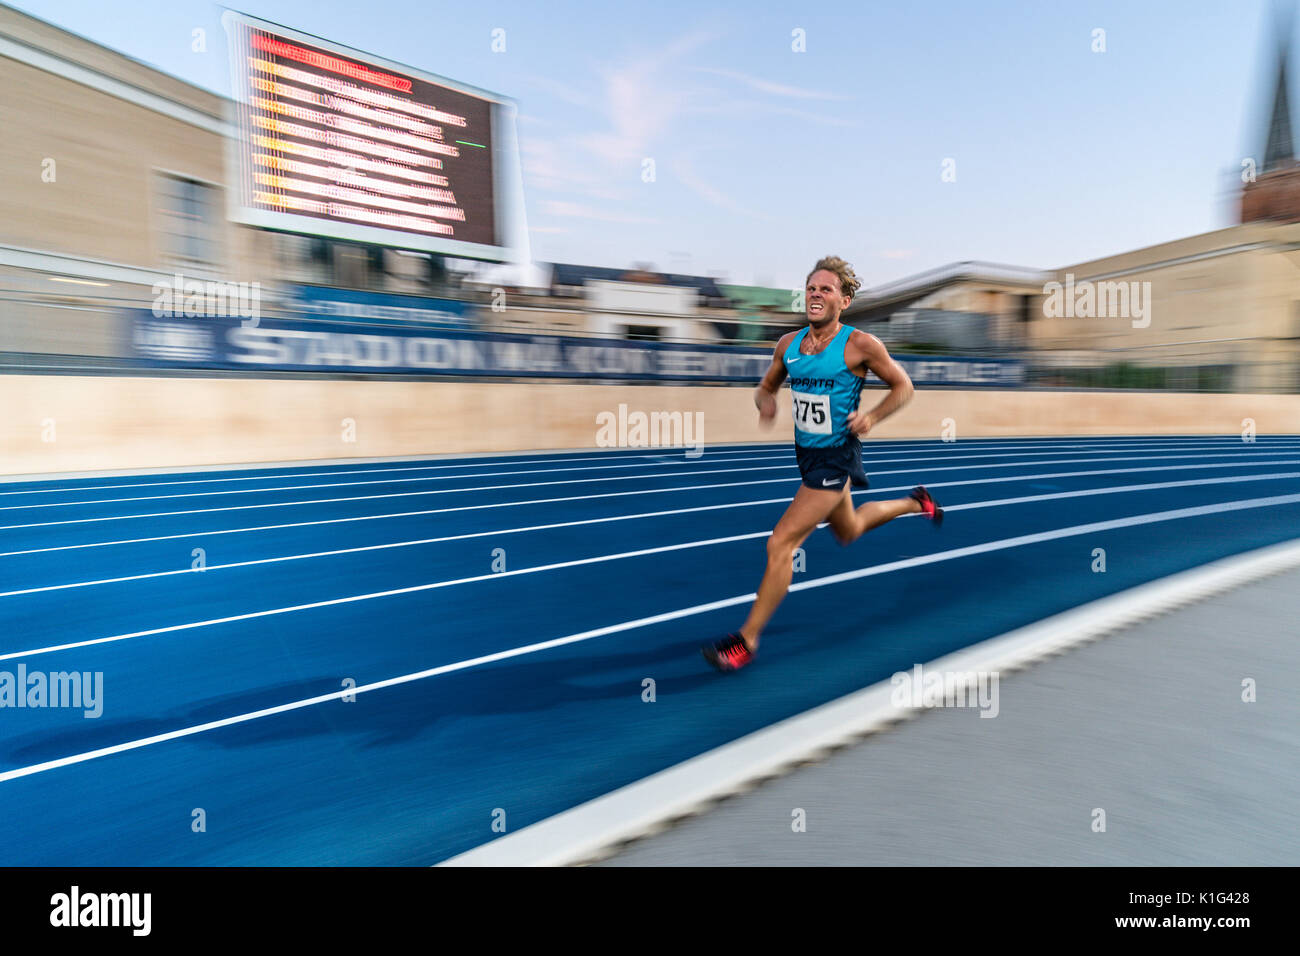 Panning shot of running on the final lap of 5 k track race Stock Photo